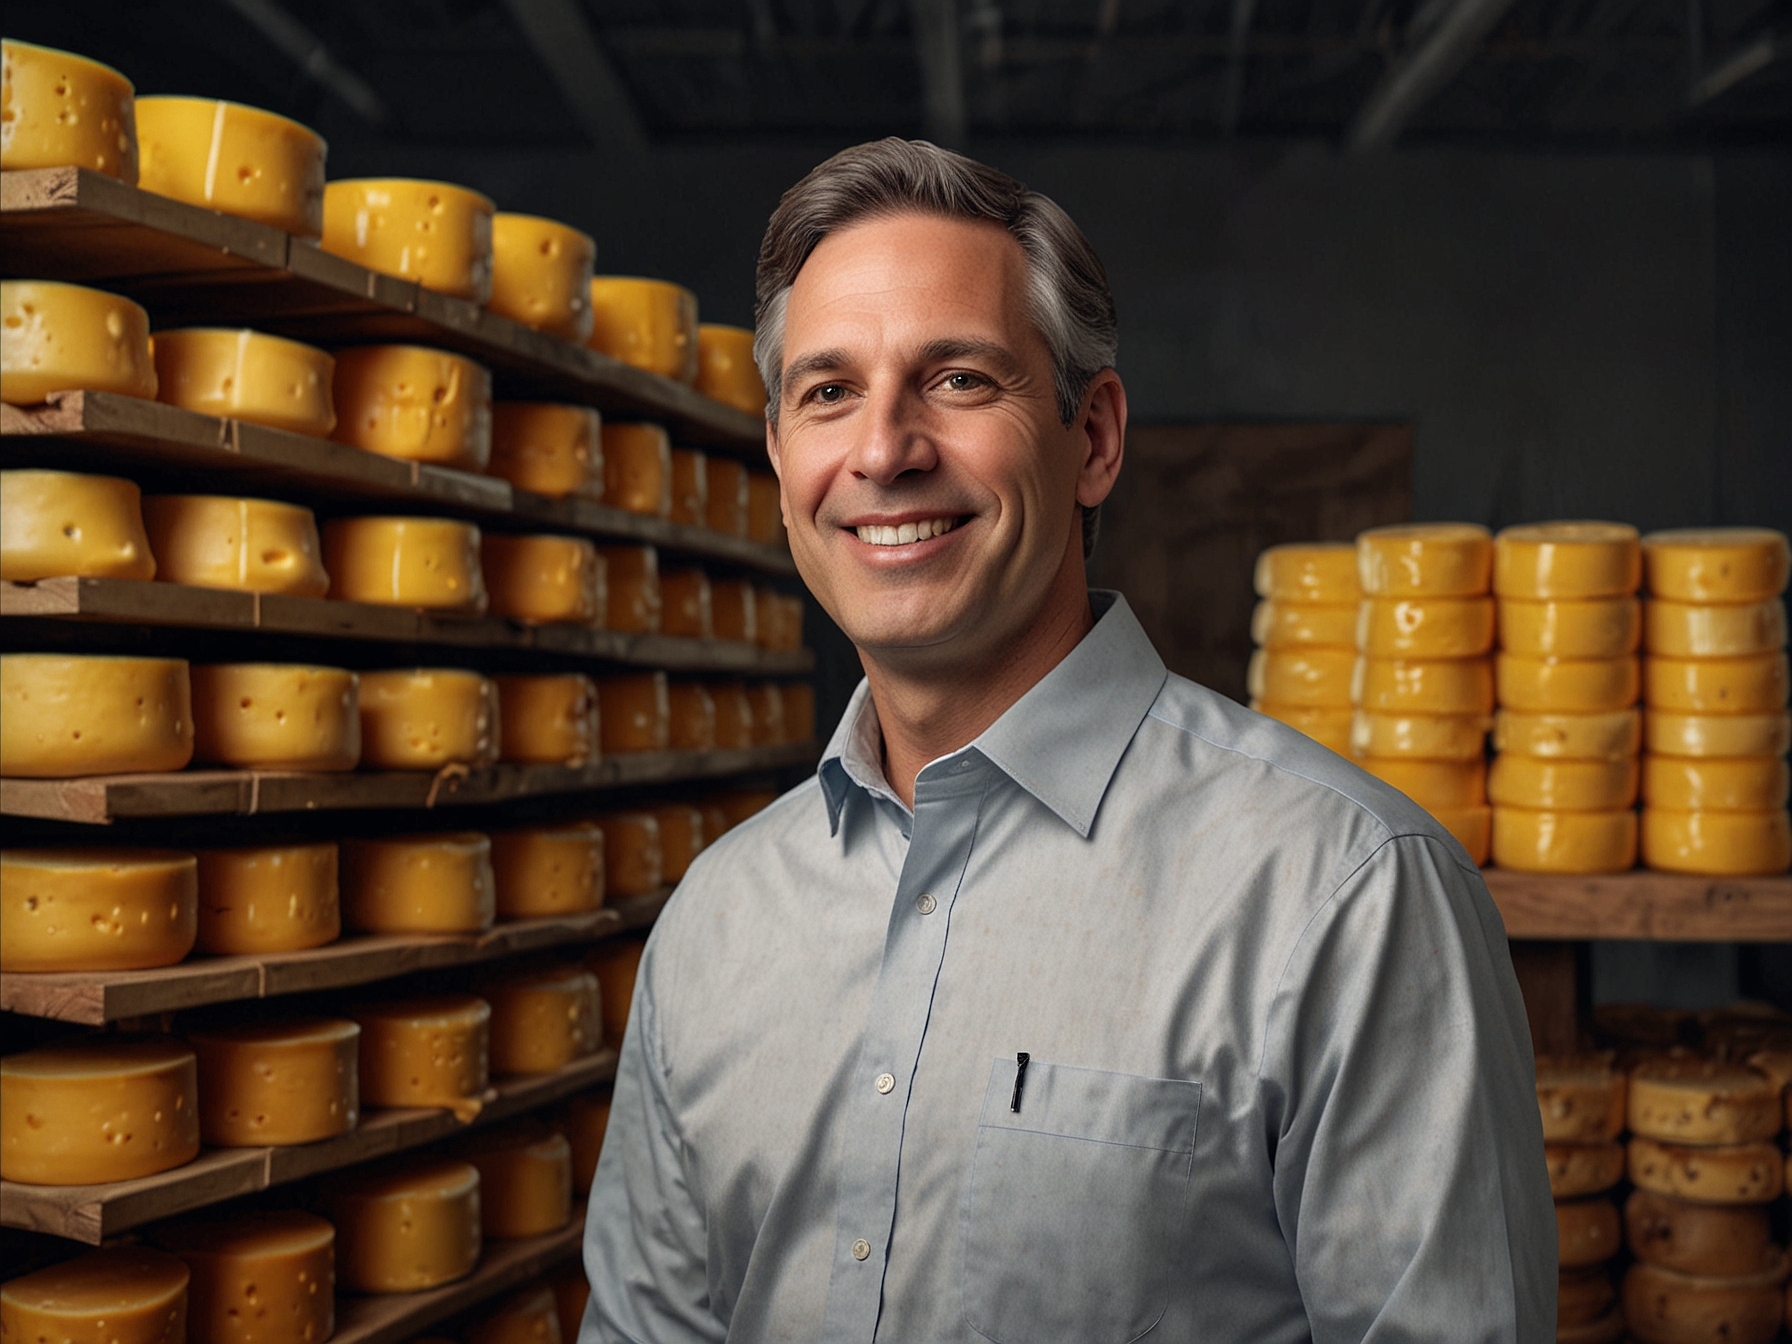 Michael Pellegrino, Sargento's new COO, stands with a backdrop of cheese production, symbolizing his new role in driving operational excellence and future growth for the company.